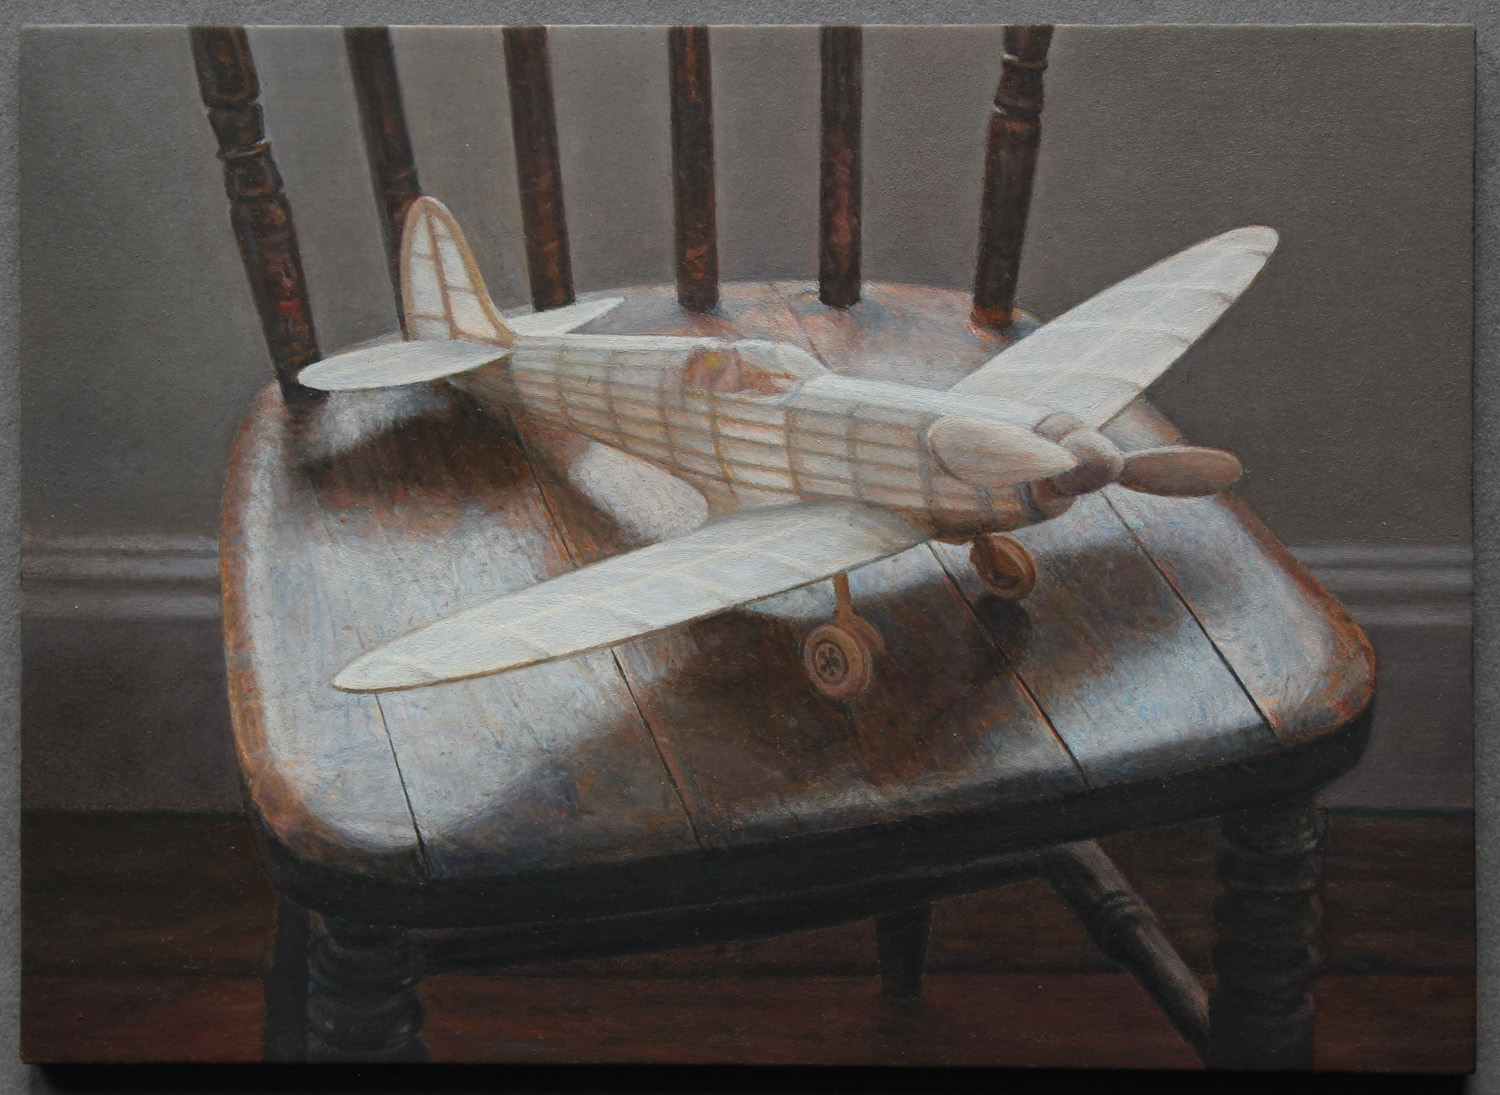 Lucy Mackenzie, "Model Aeroplane on a Chair," 2023, oil on board, 5 ½ x 4 inches